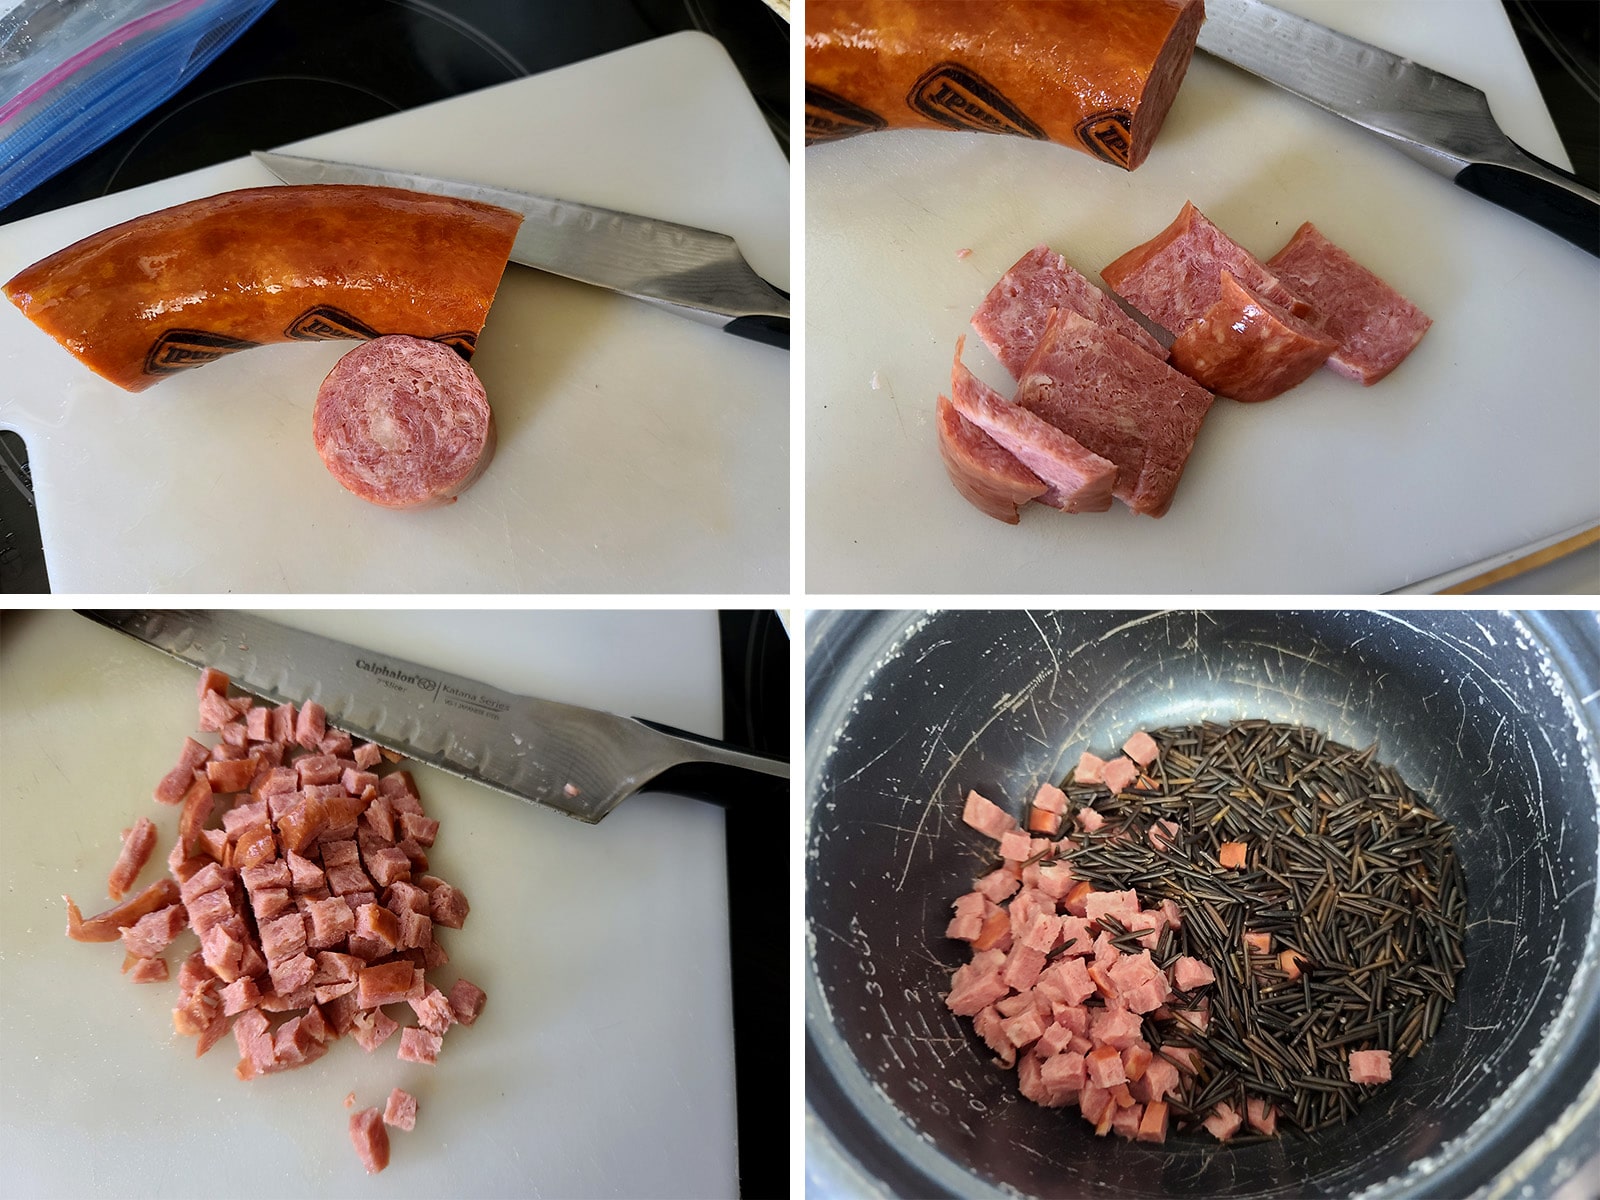 Smoked sausage being cut up and added to a rice maker with wild rice.